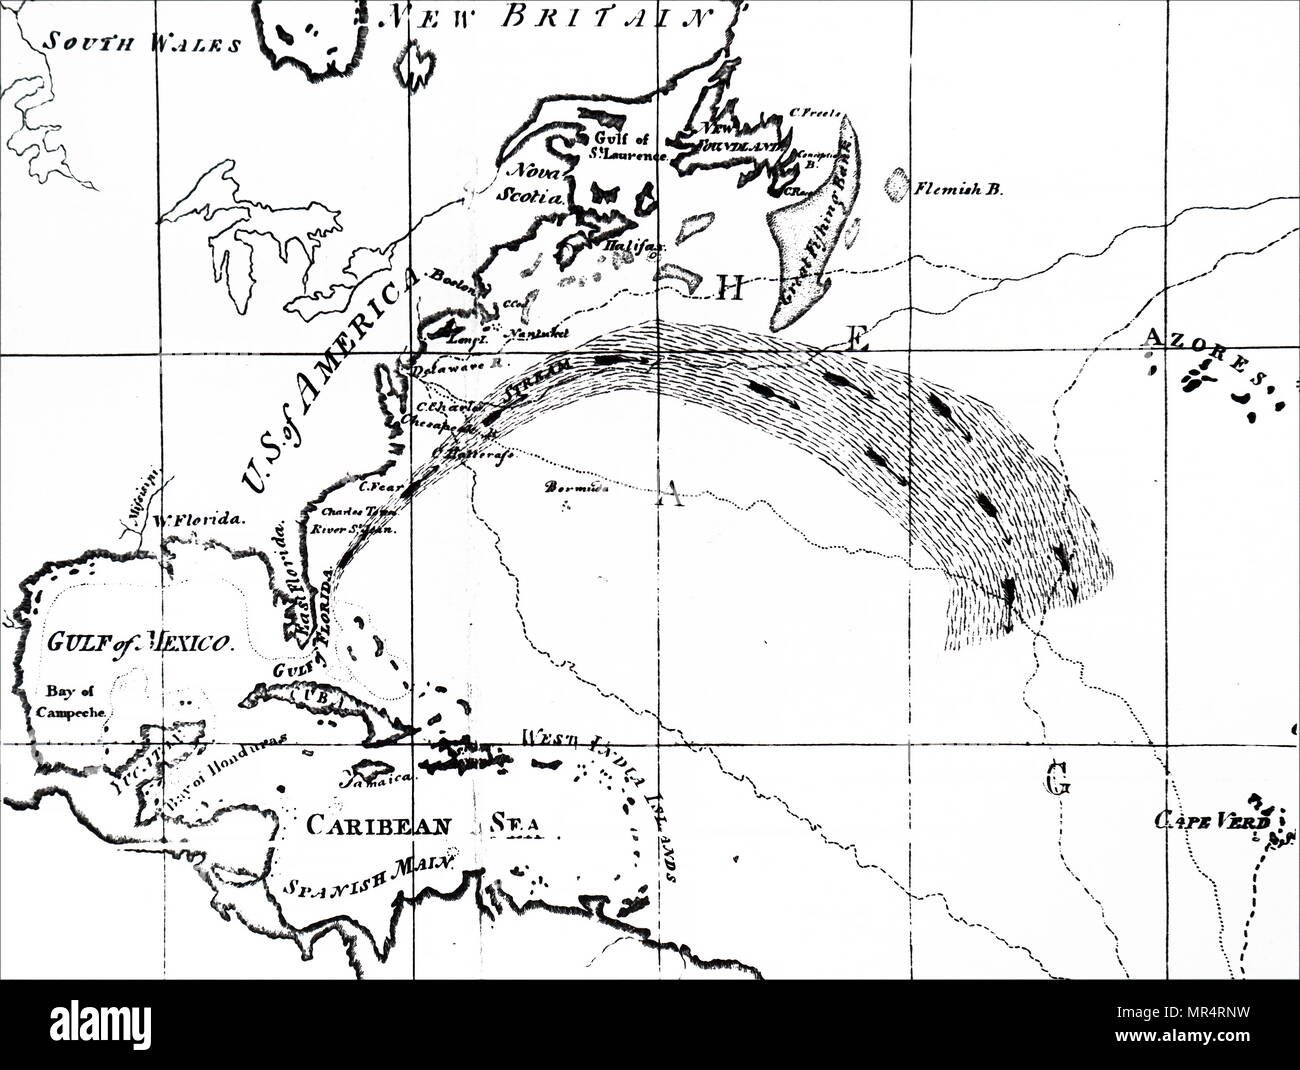 Map depicting a section of the Atlantic Ocean showing the Gulf Stream. The Gulf Stream, together with its northern extension the North Atlantic Drift, is a warm and swift Atlantic ocean current that originates in the Gulf of Mexico and stretches to the tip of Florida, and follows the eastern coastlines of the United States and Newfoundland before crossing the Atlantic Ocean. Dated 18th century Stock Photo